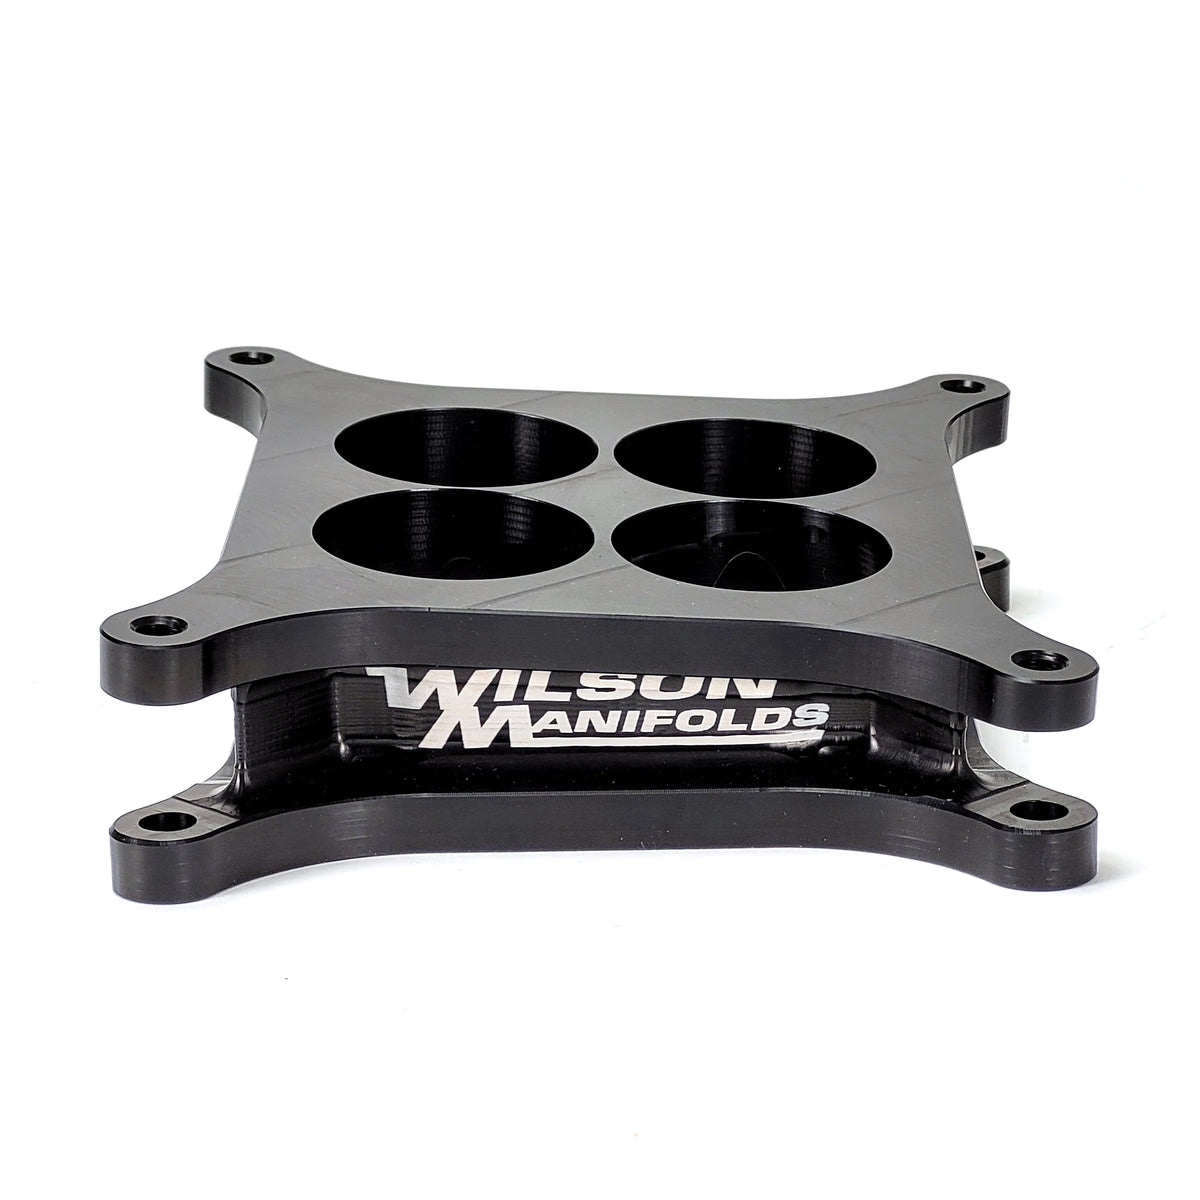 Wilson Manifolds 2.00 Compound Angle Tapered Spacer 4150 003150